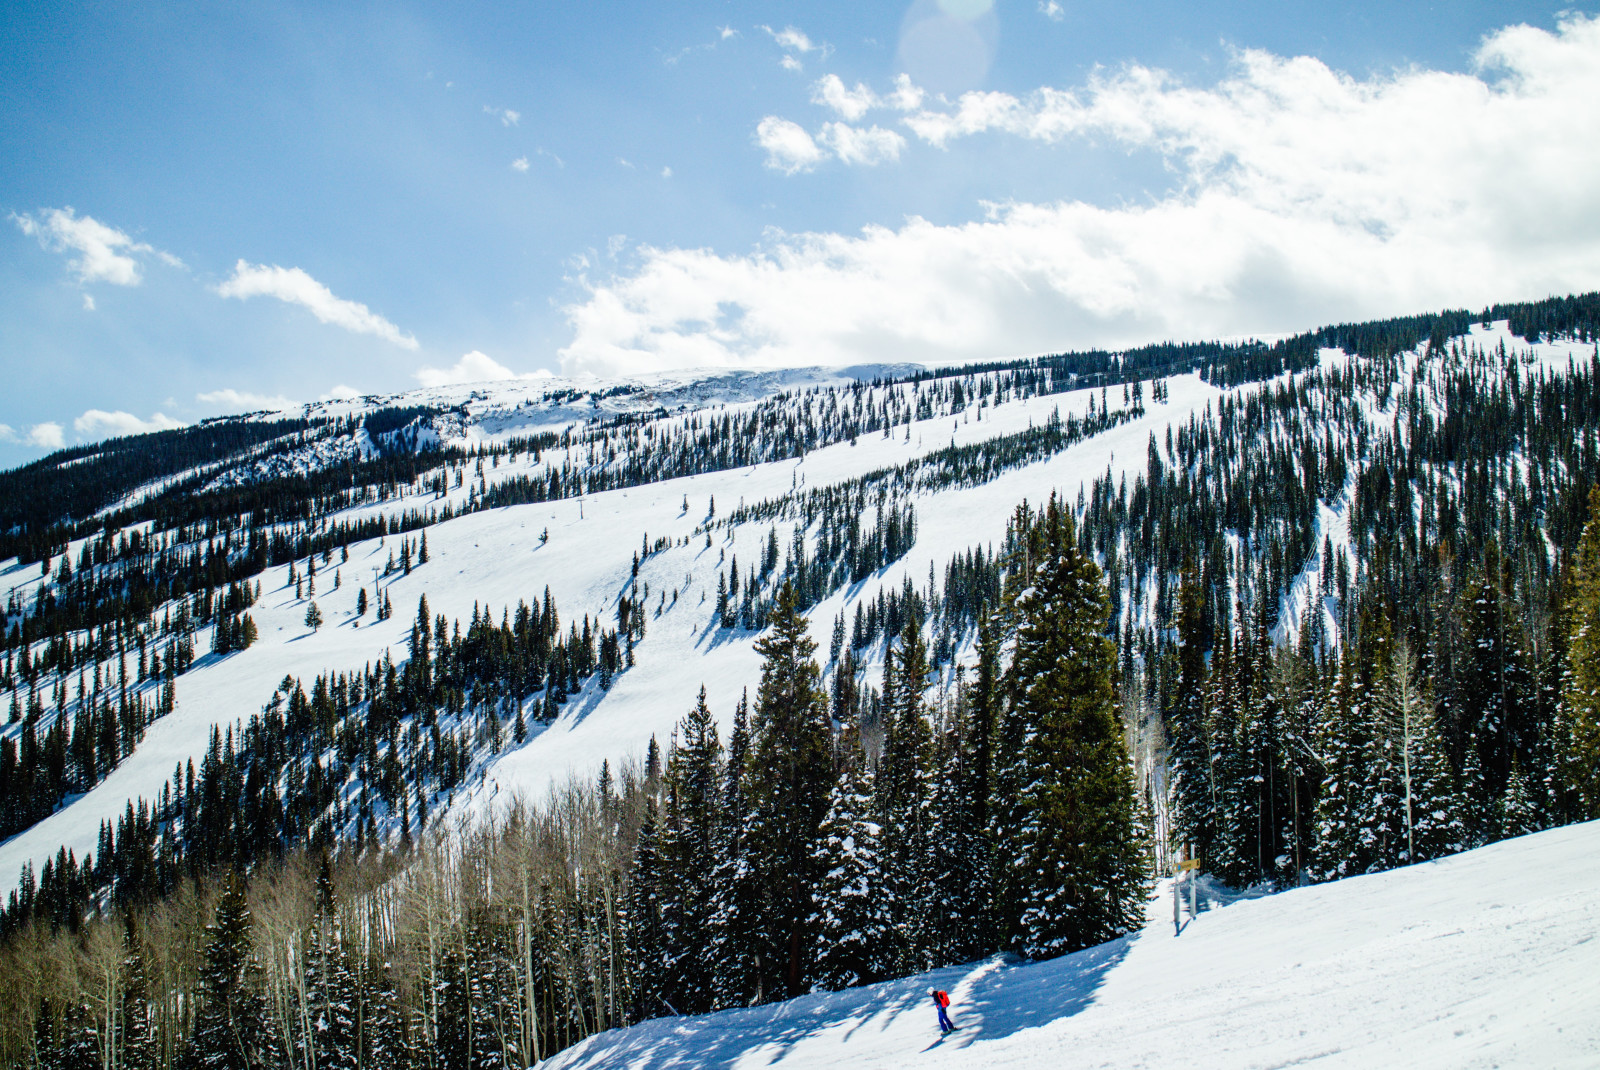 Snowy ski slopes with blue skies during daytime